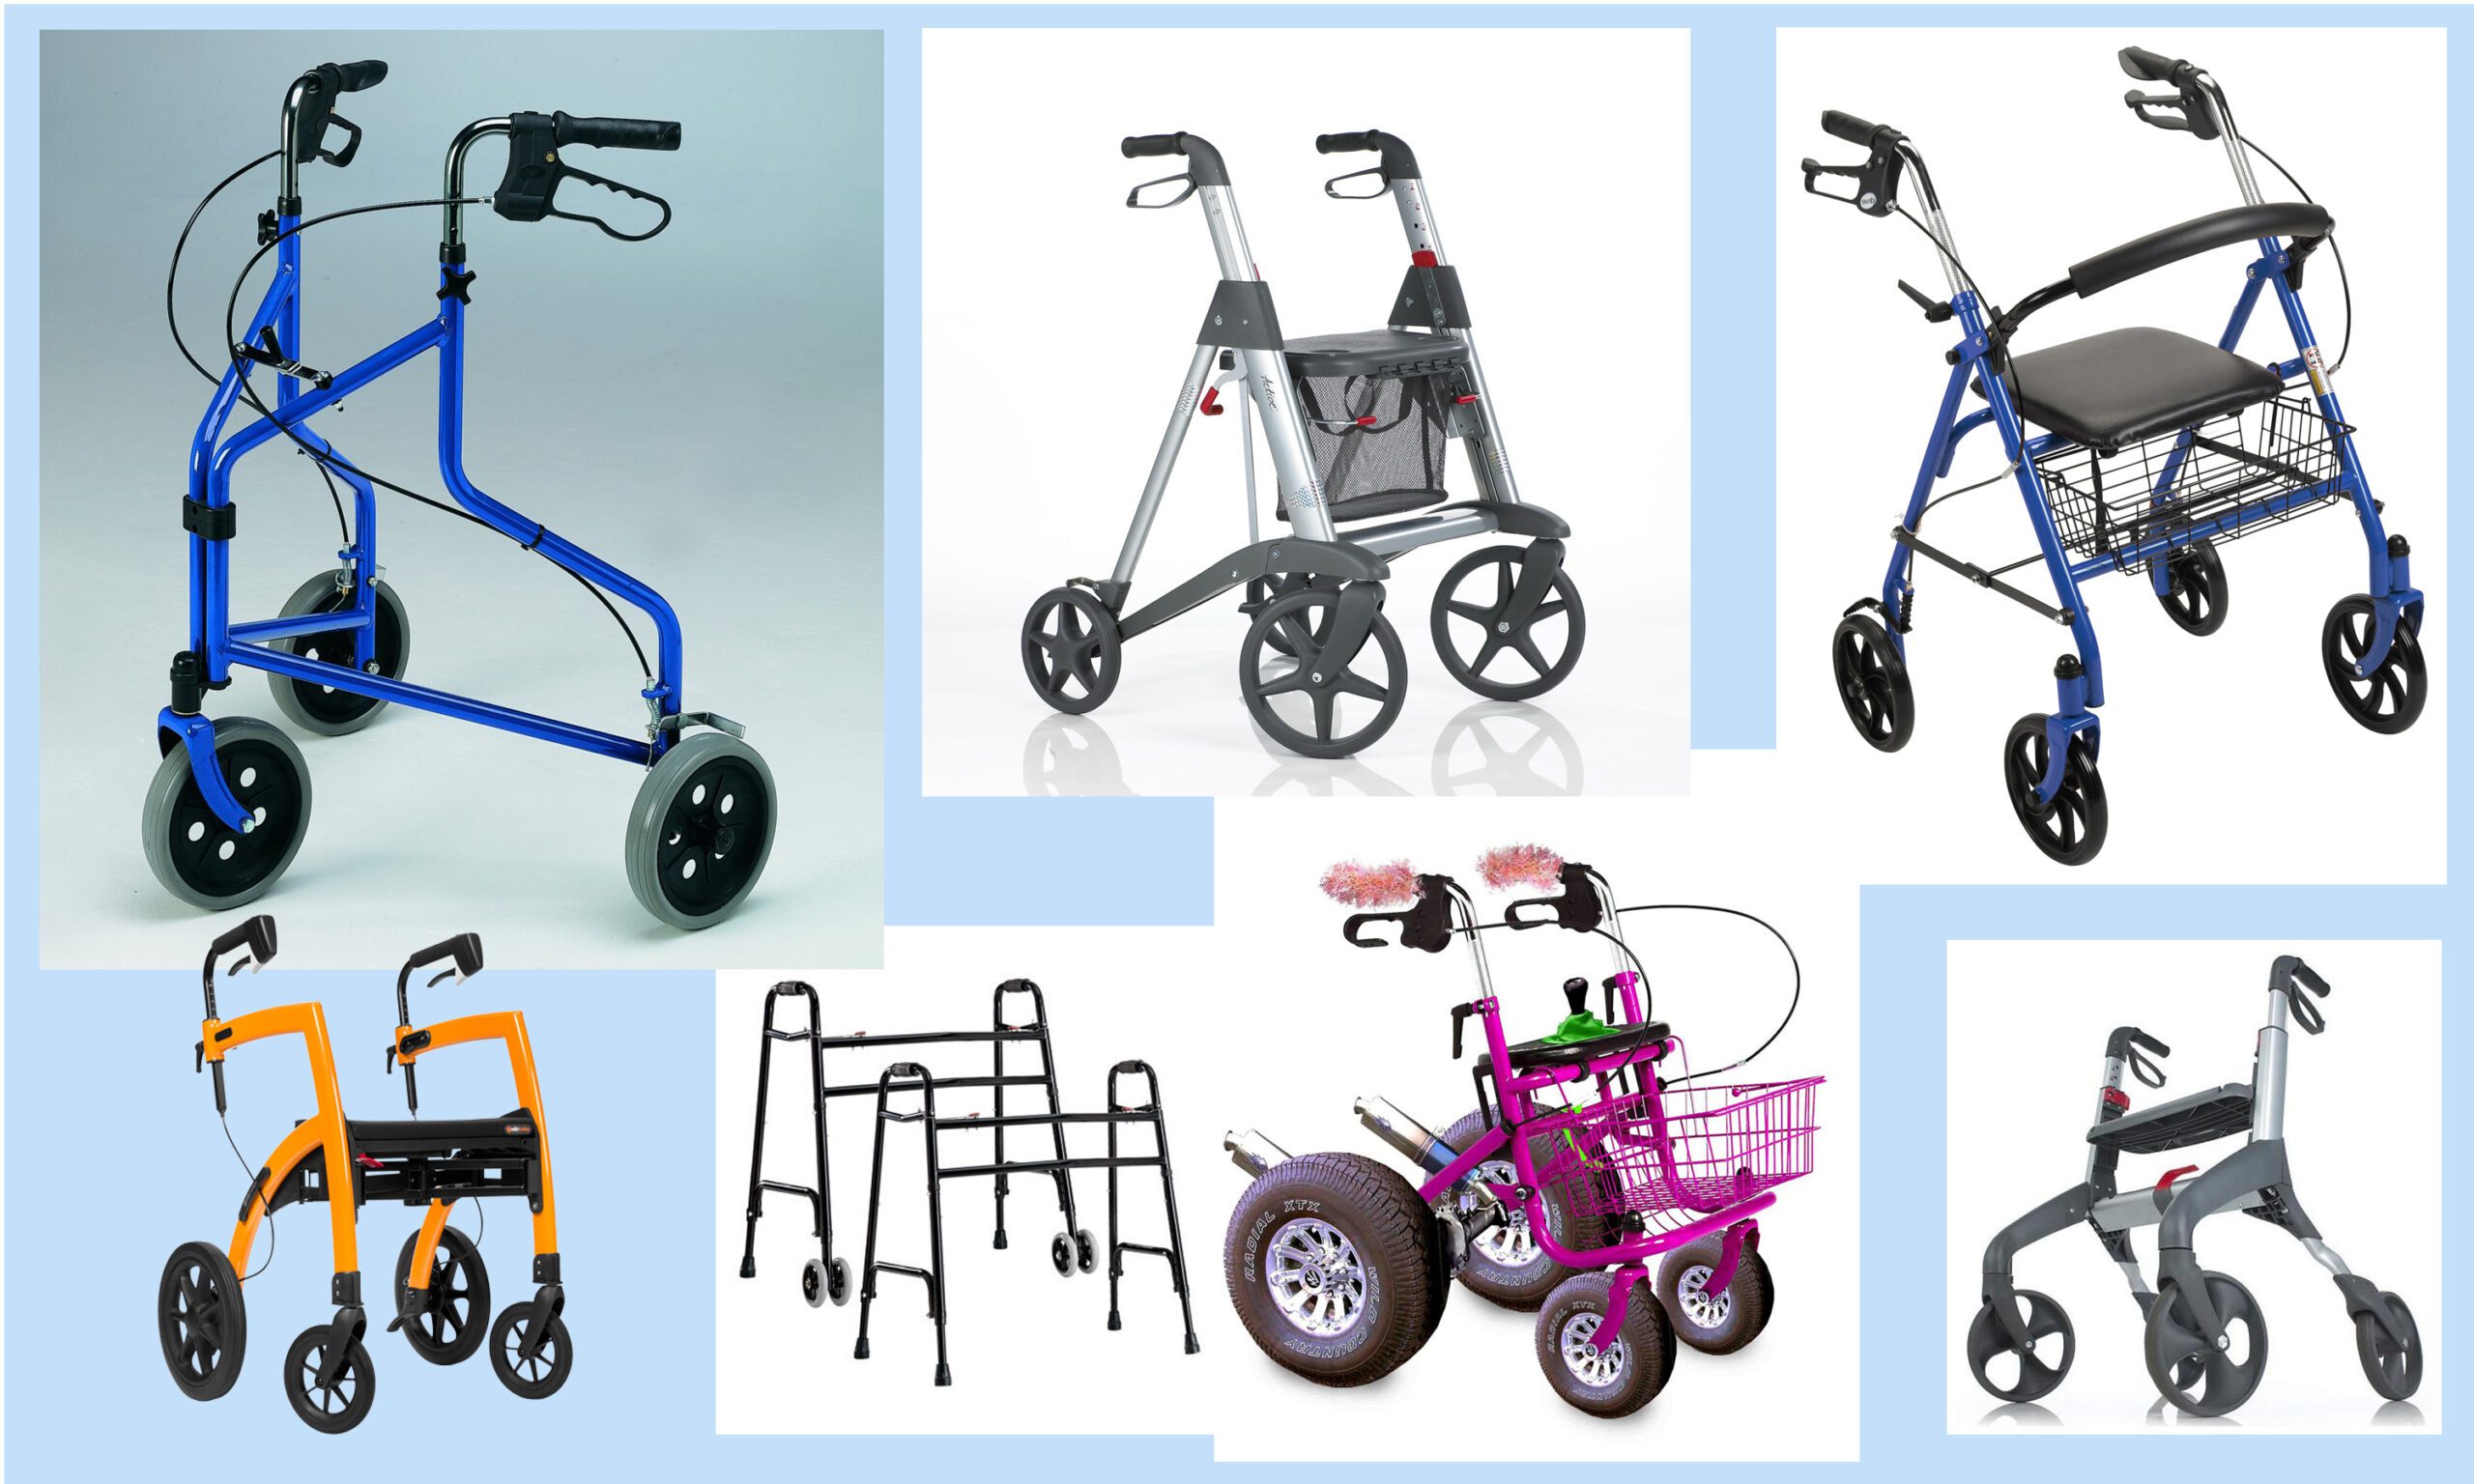 Video presentation: what features matter in a rollator (walker)?